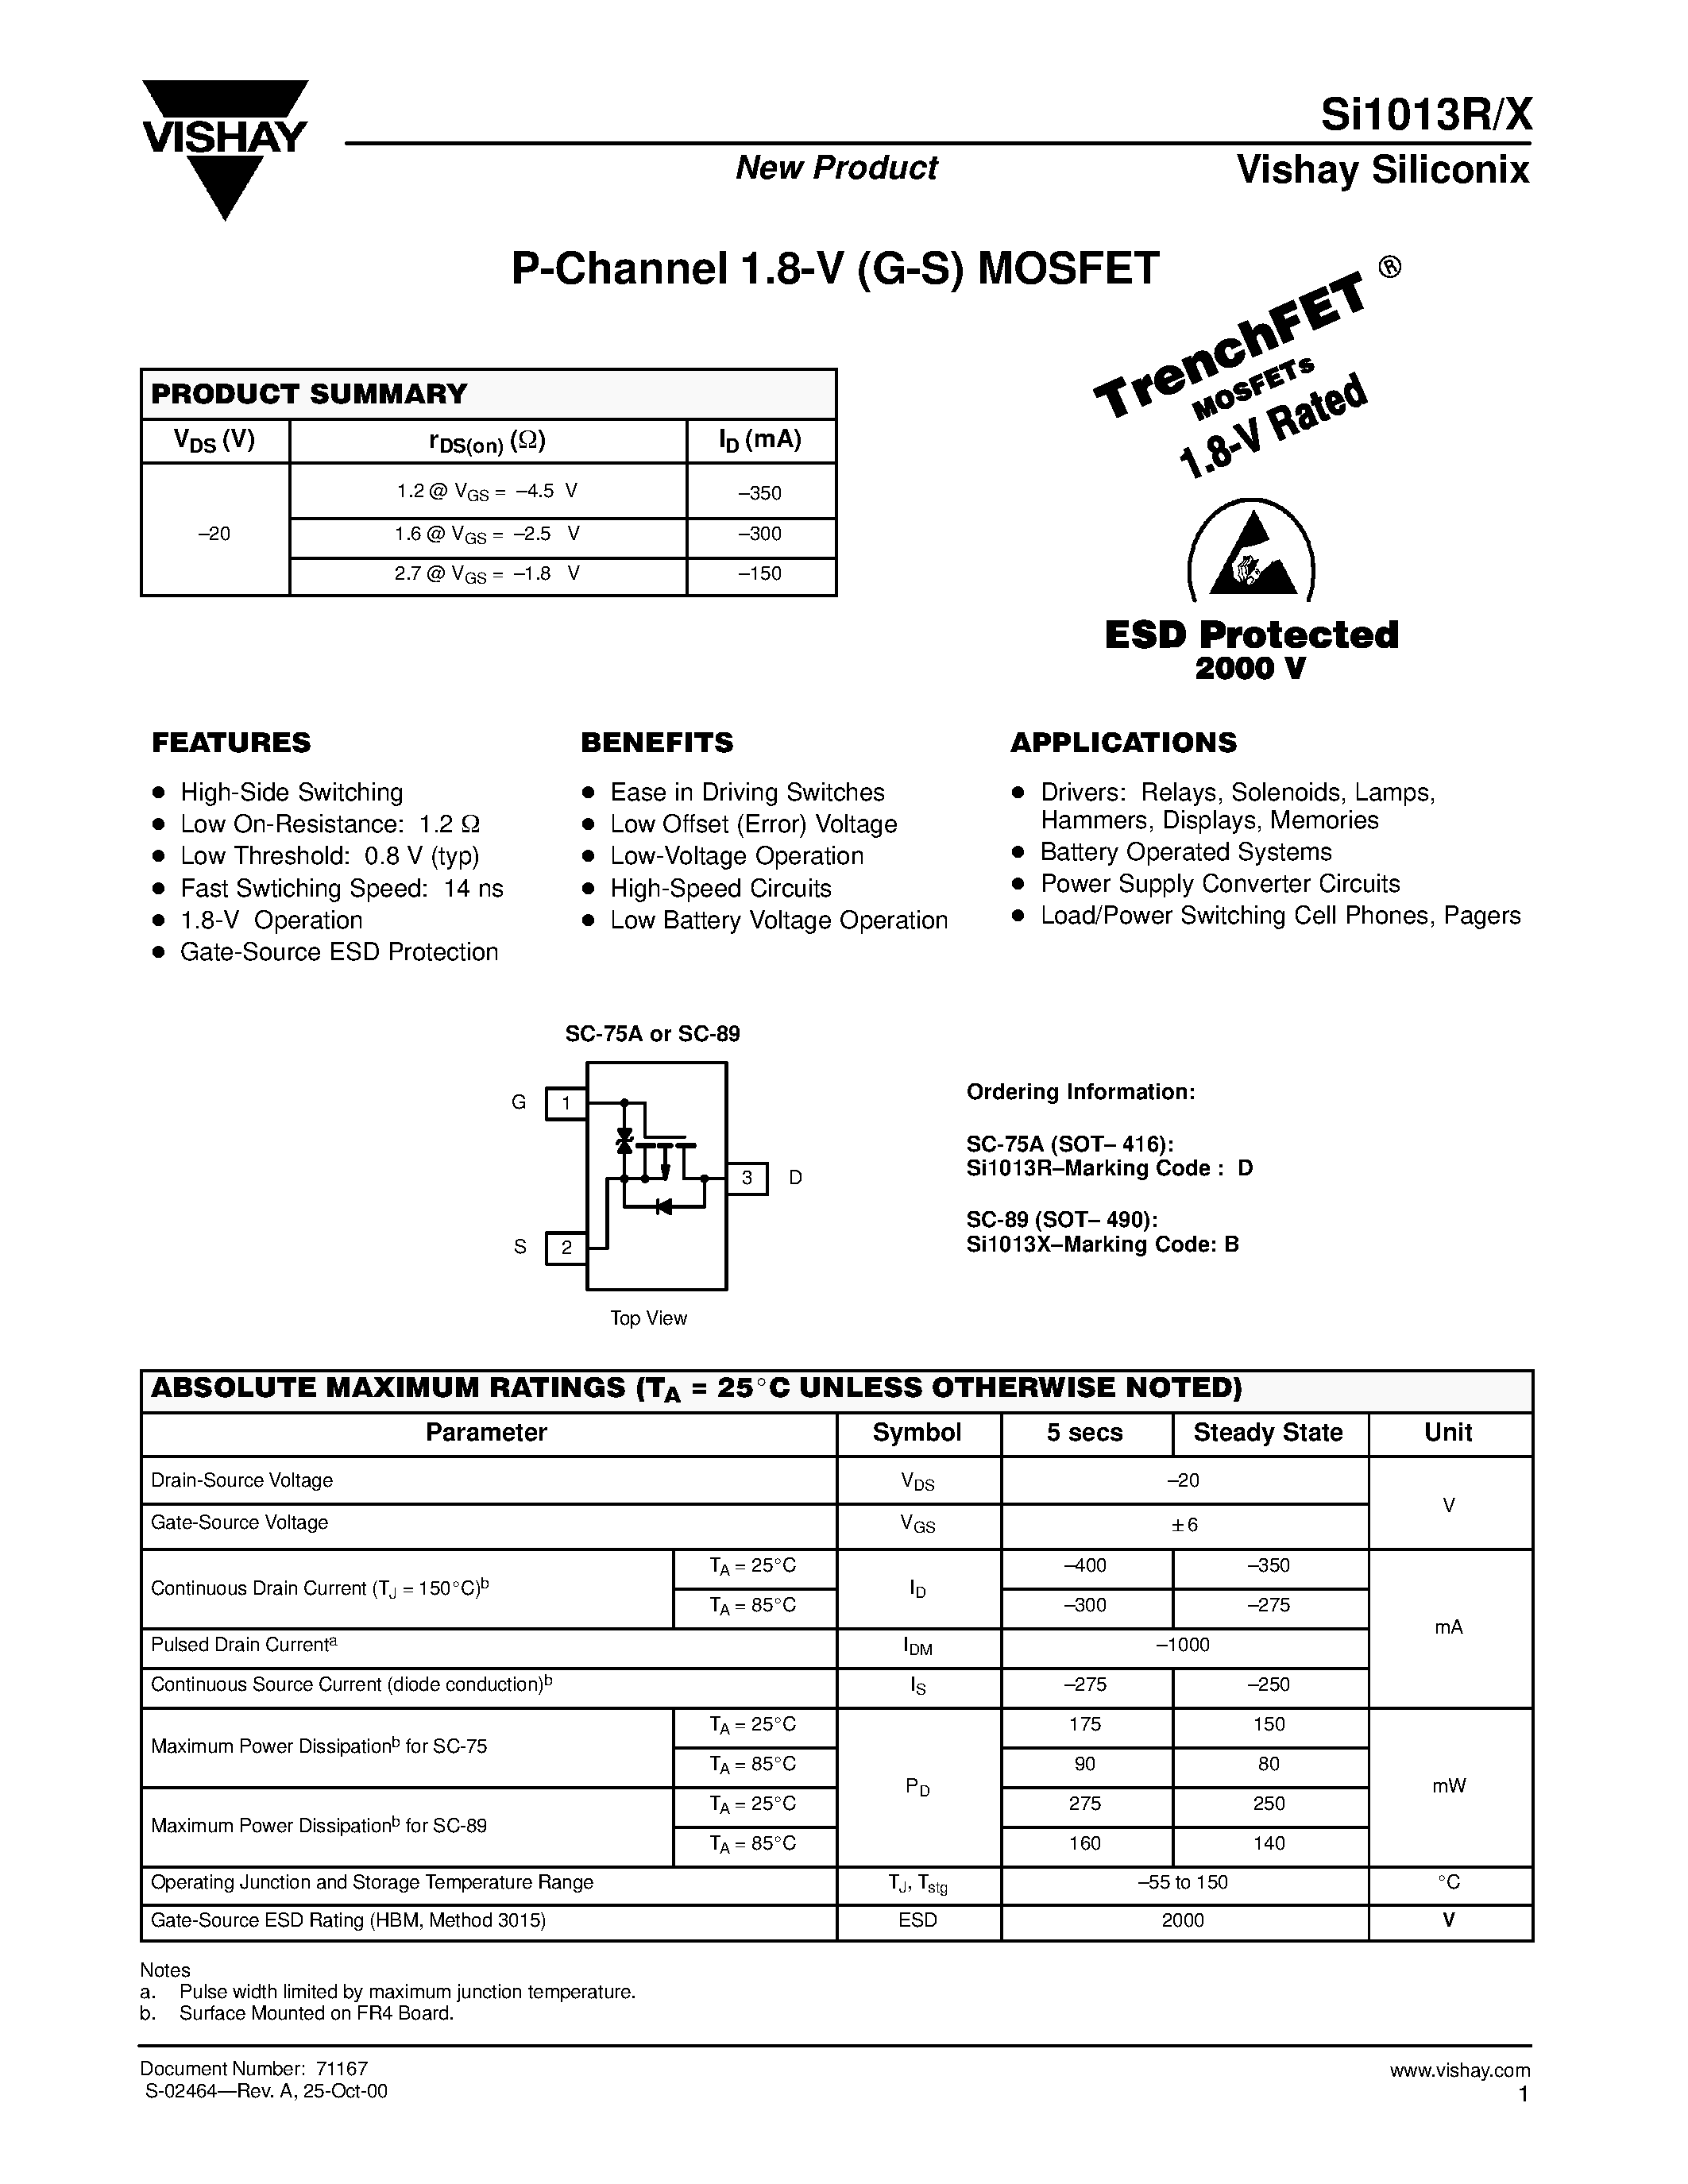 Datasheet SC-89 - P-Channel 1.8-V (G-S) MOSFET page 1